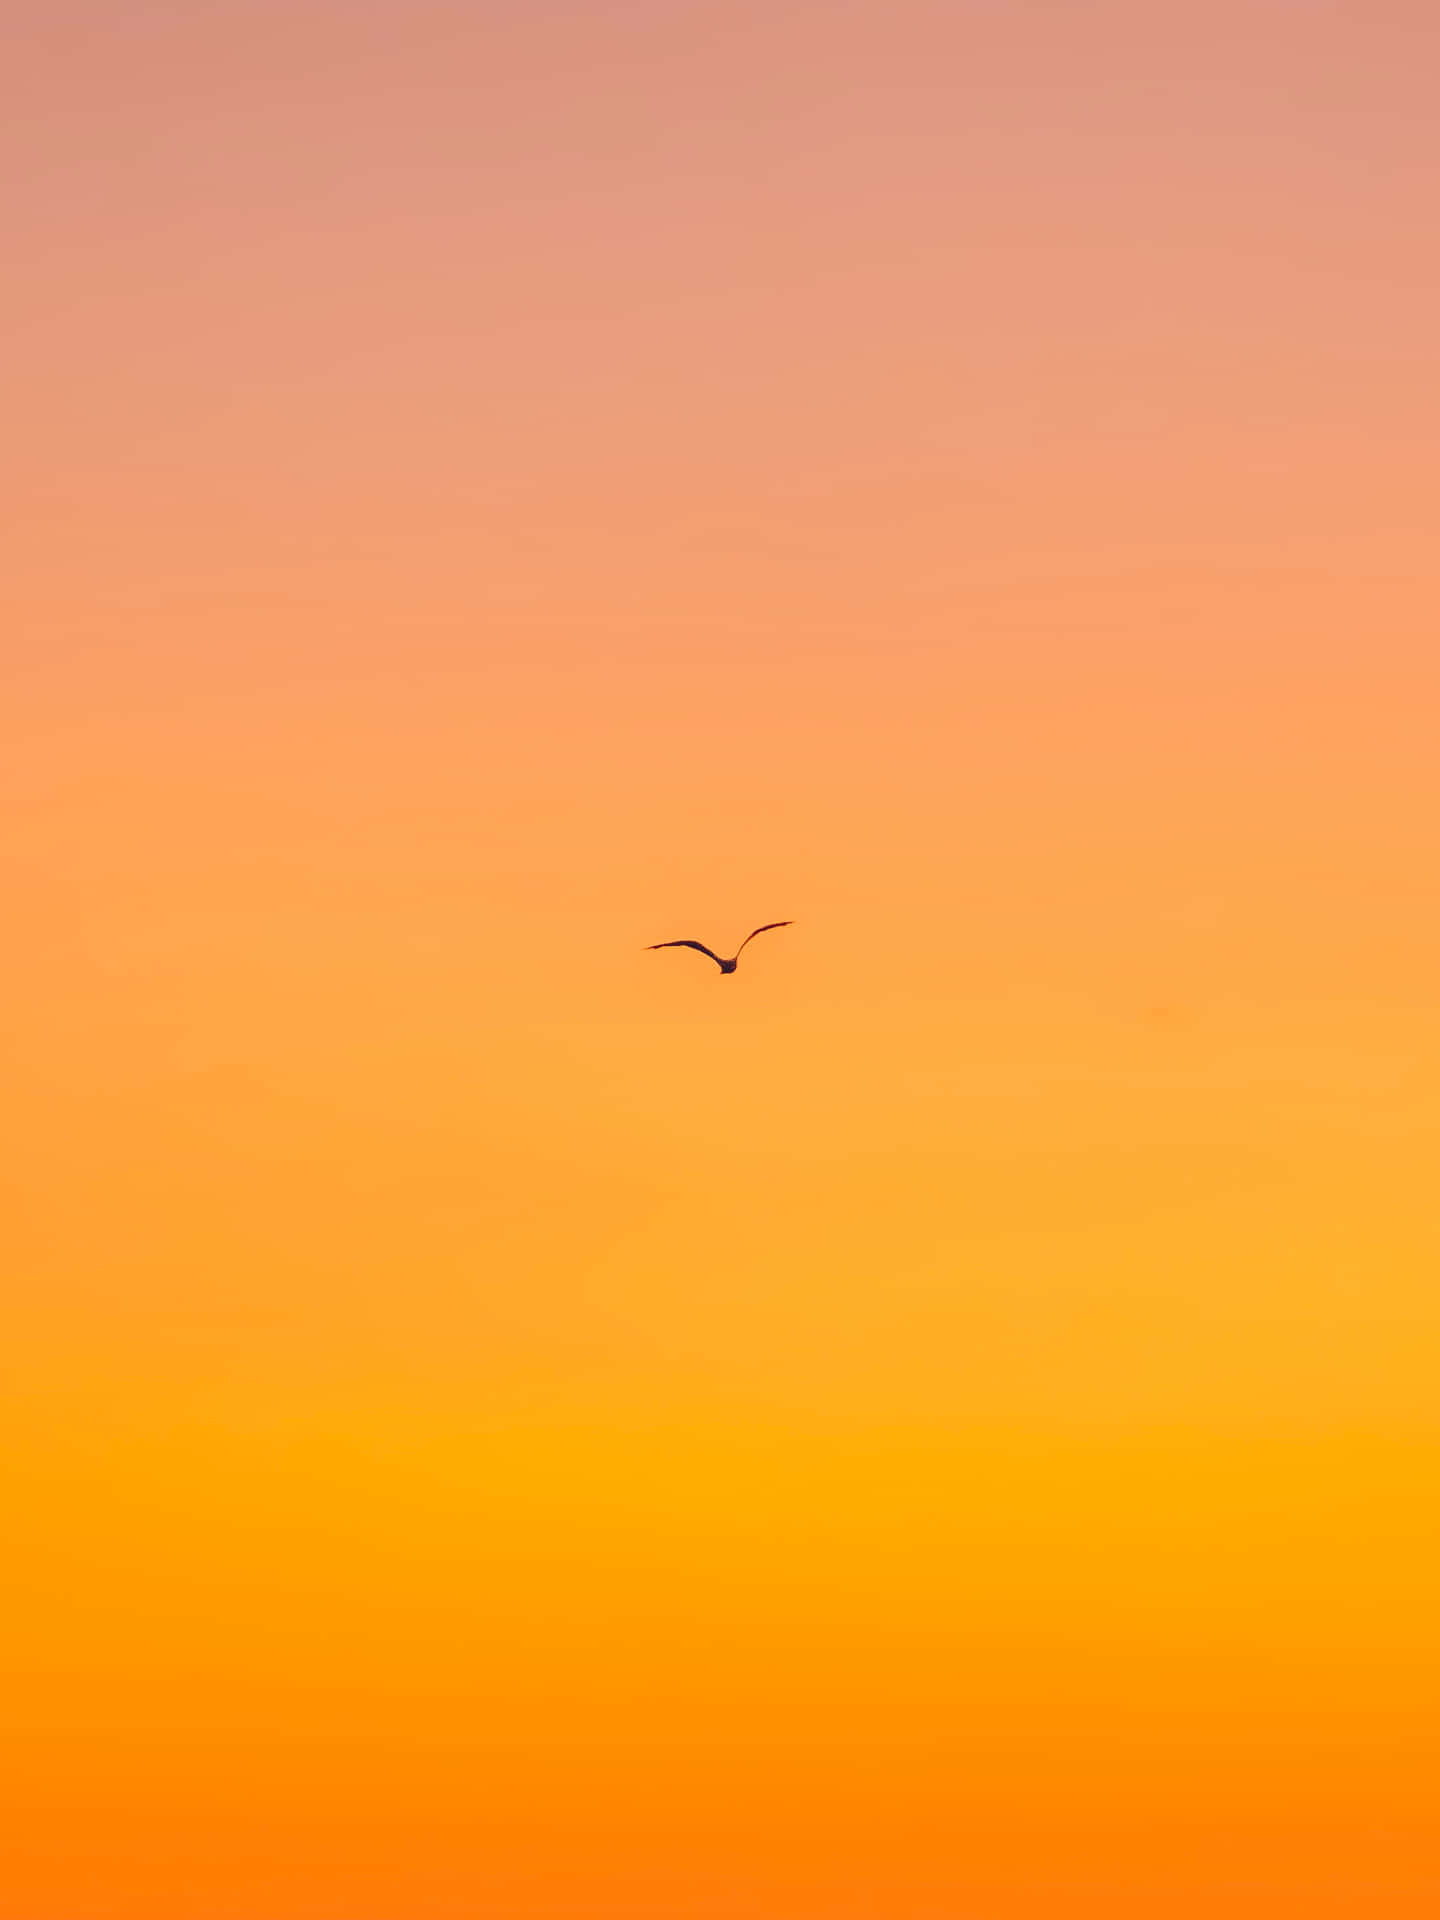 A Bird Flying In The Sky At Sunset Wallpaper